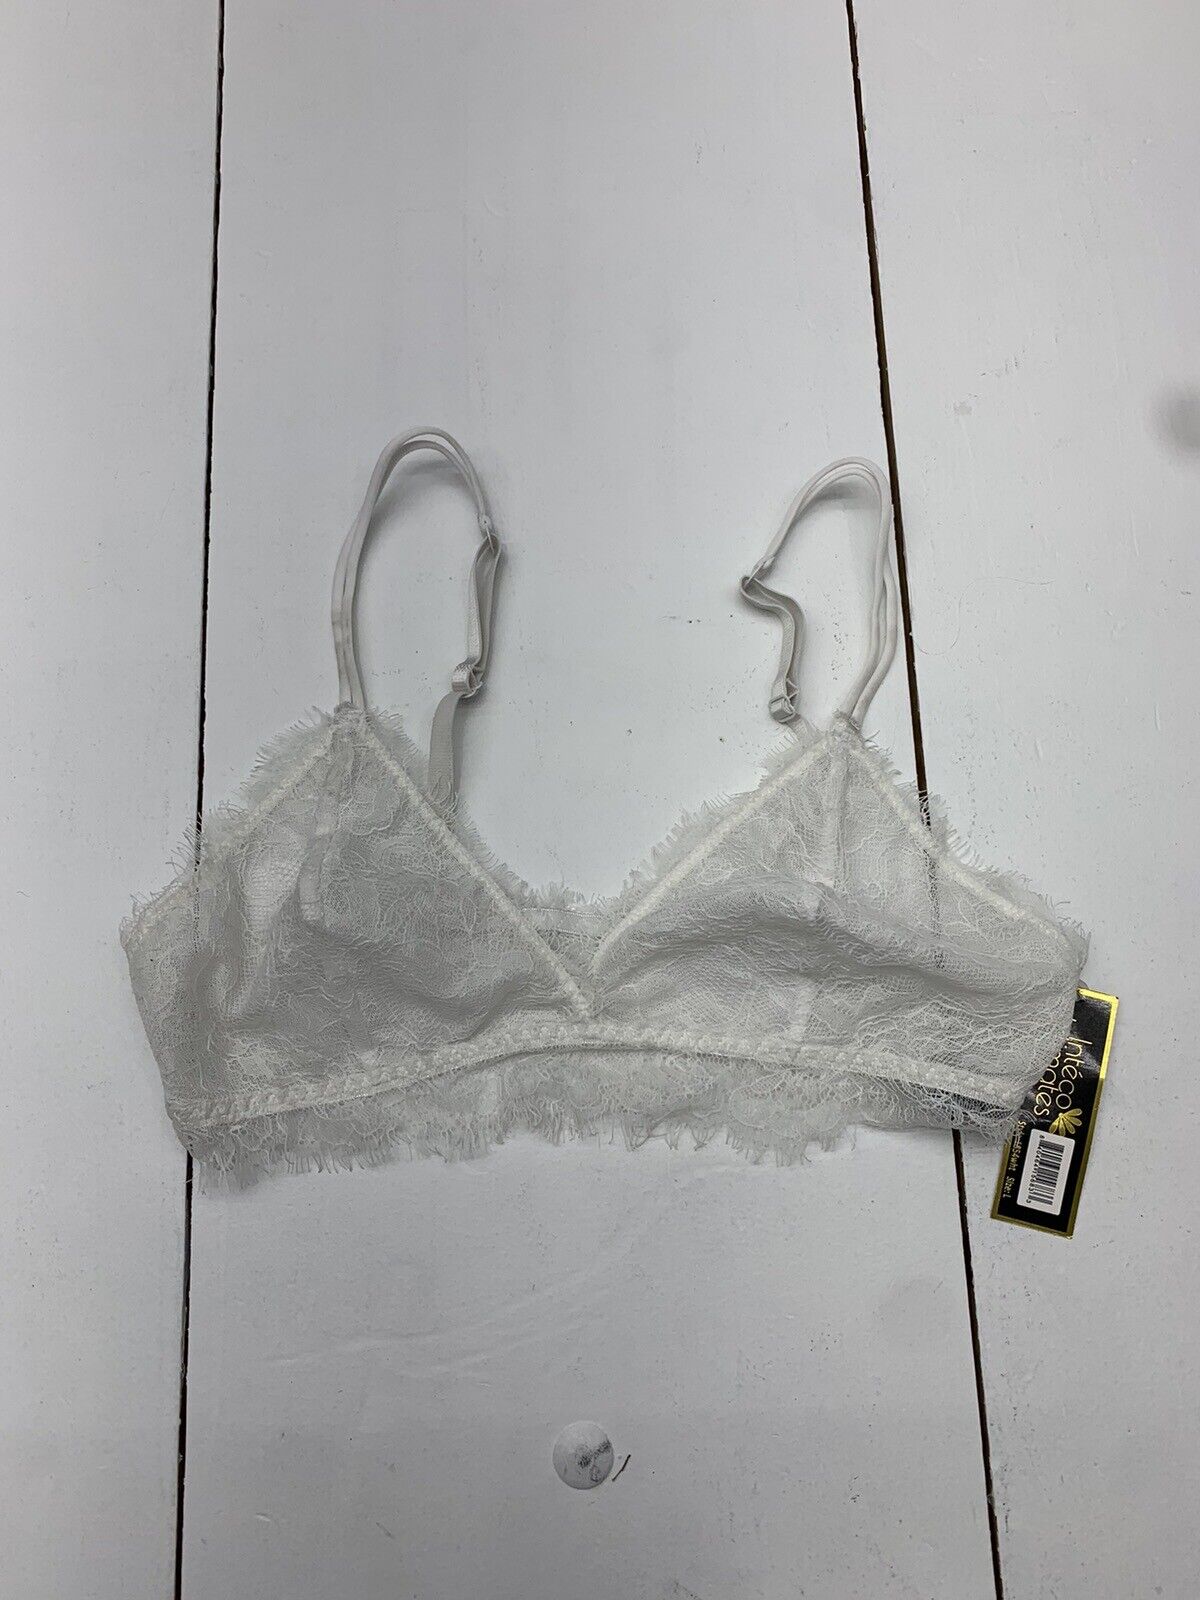 Inteco Intimates Womens White Lace Bralette Size Large - beyond